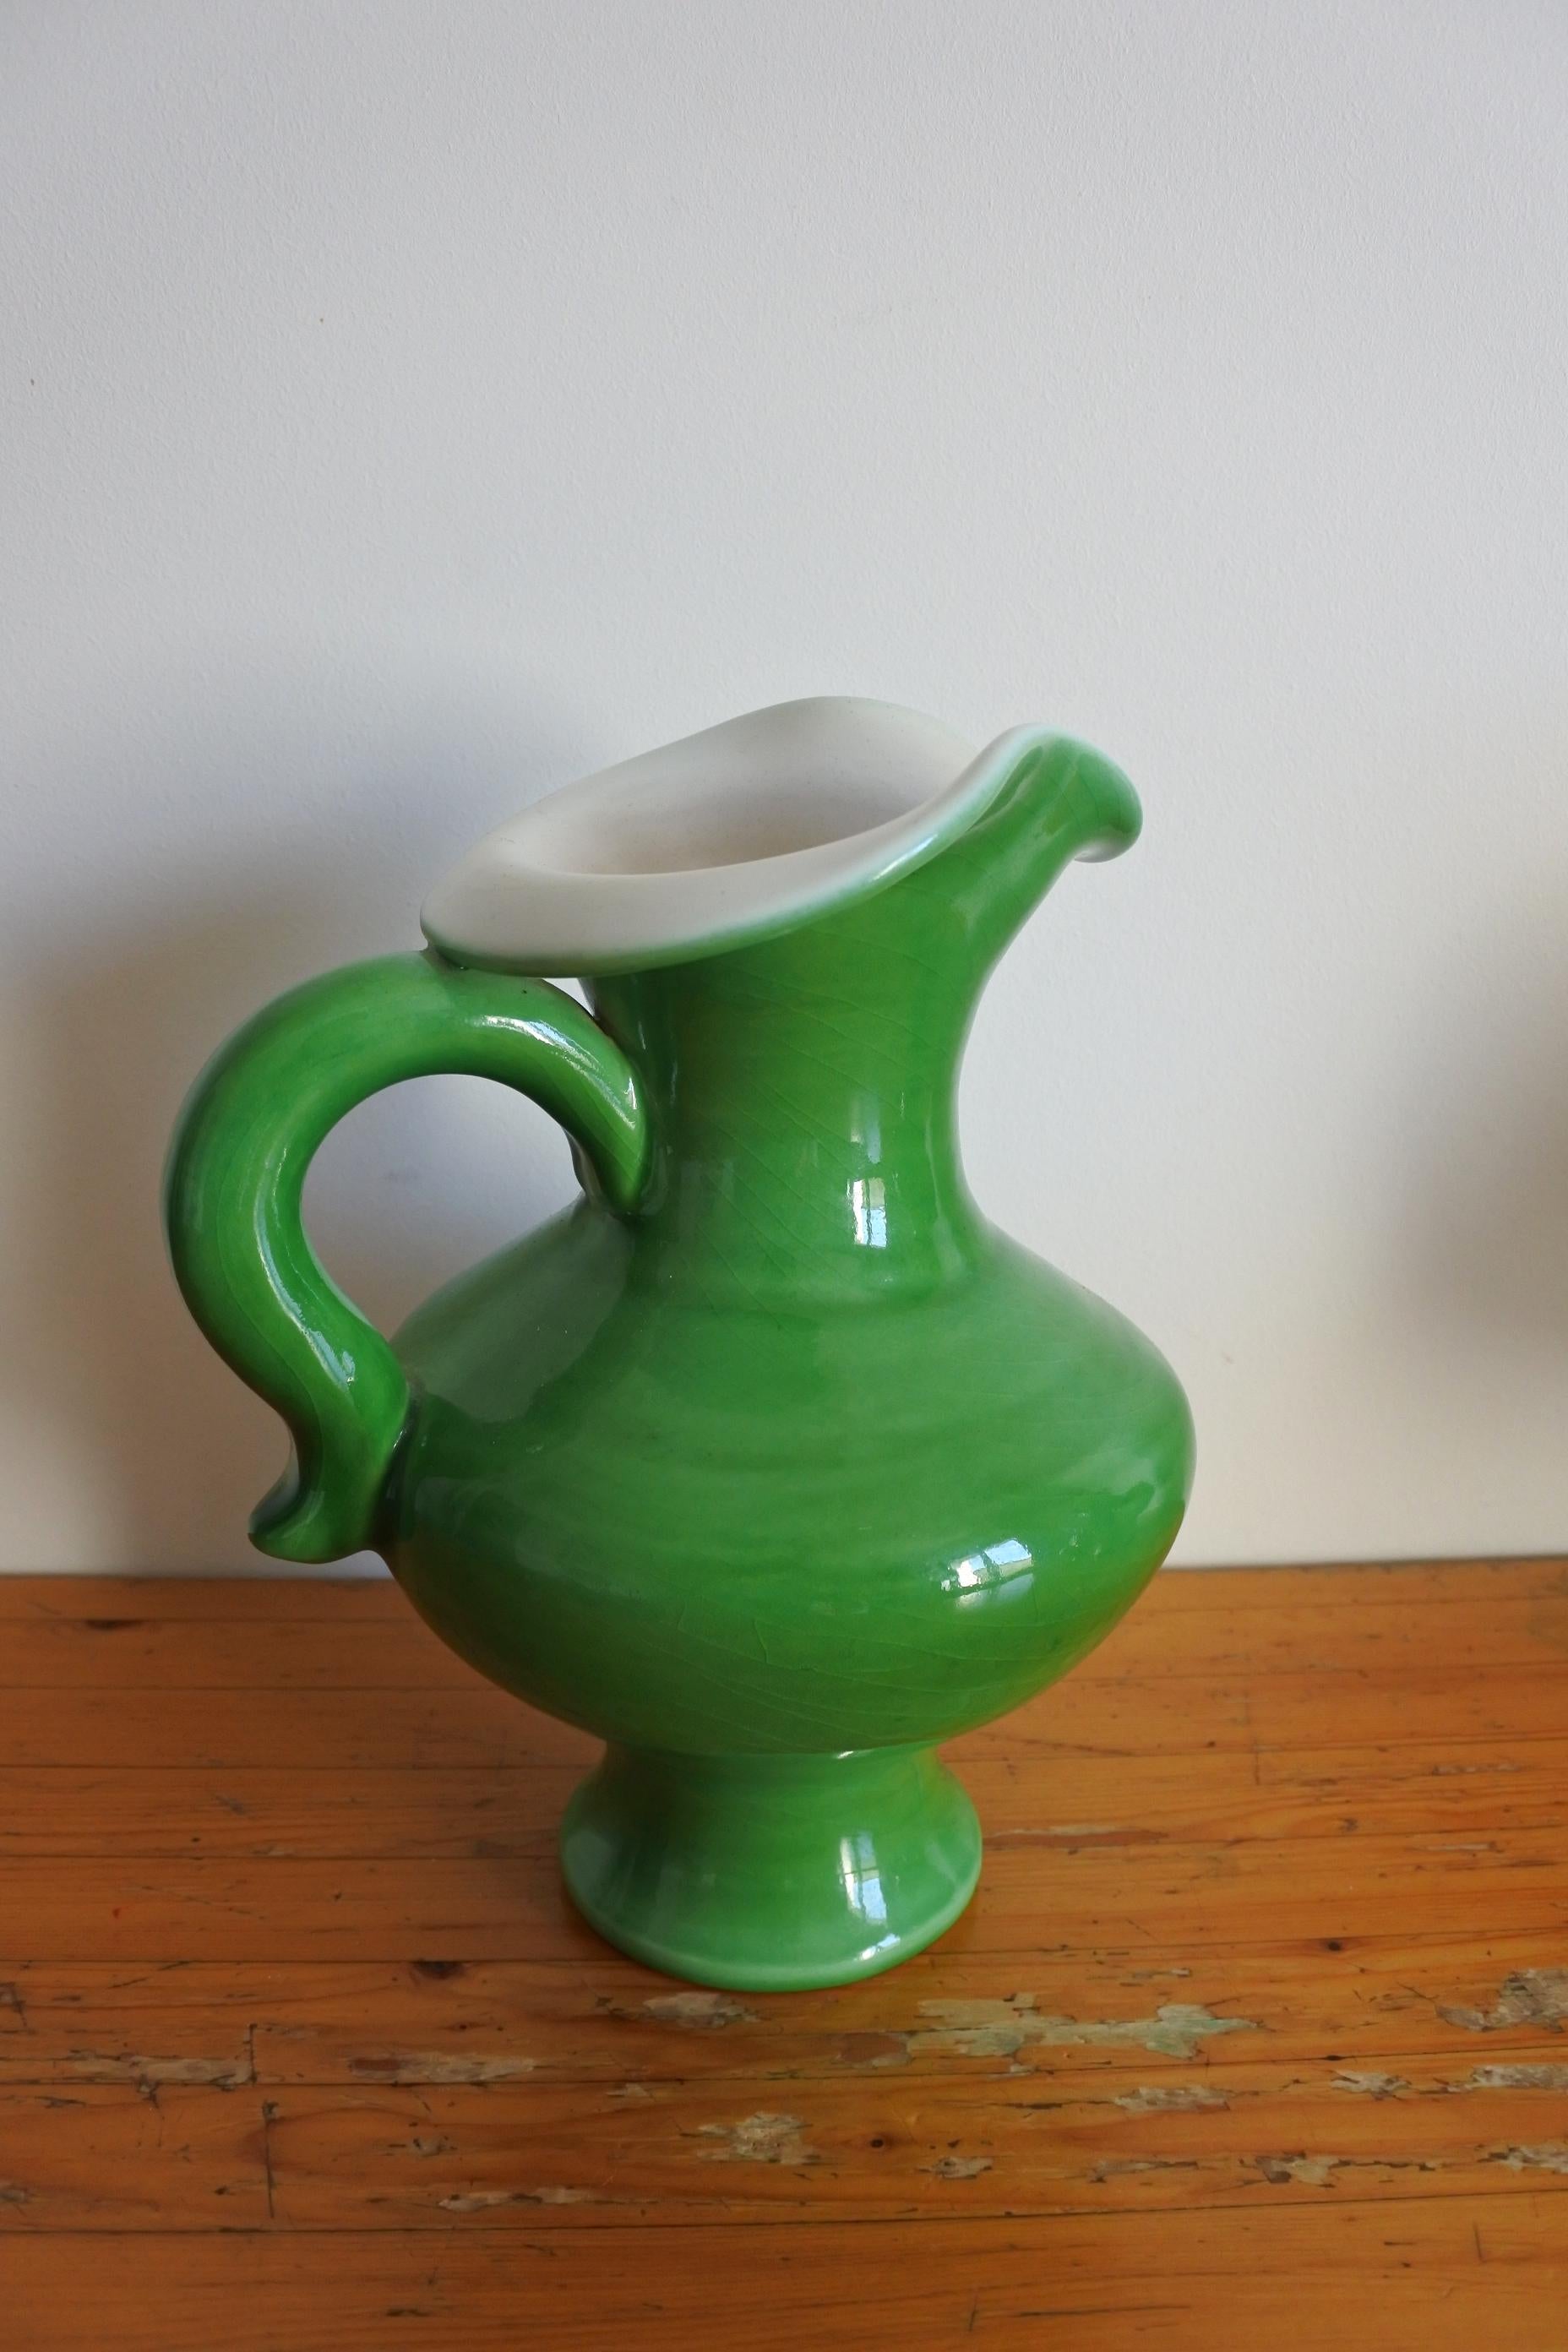 Freeform ceramic pitcher vase by French potter Pol Chambost..
Green and white glaze.
Signed.